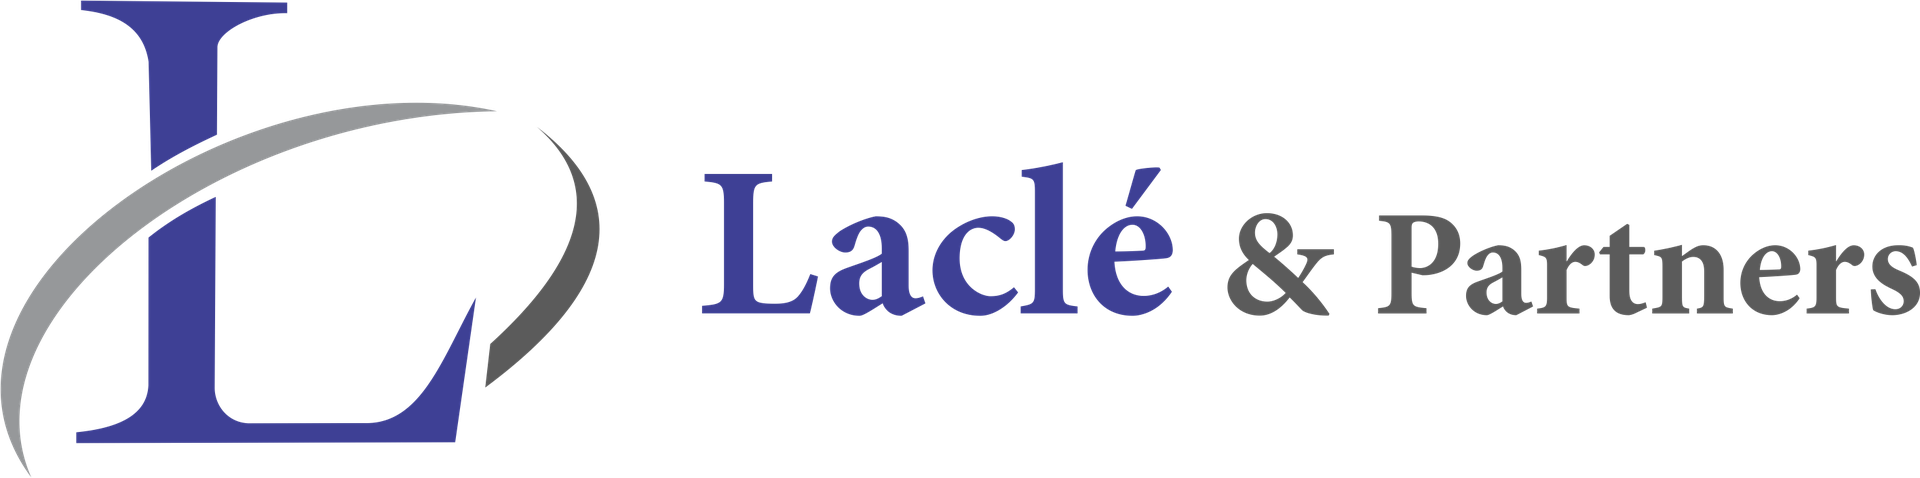 Lacle & Partners